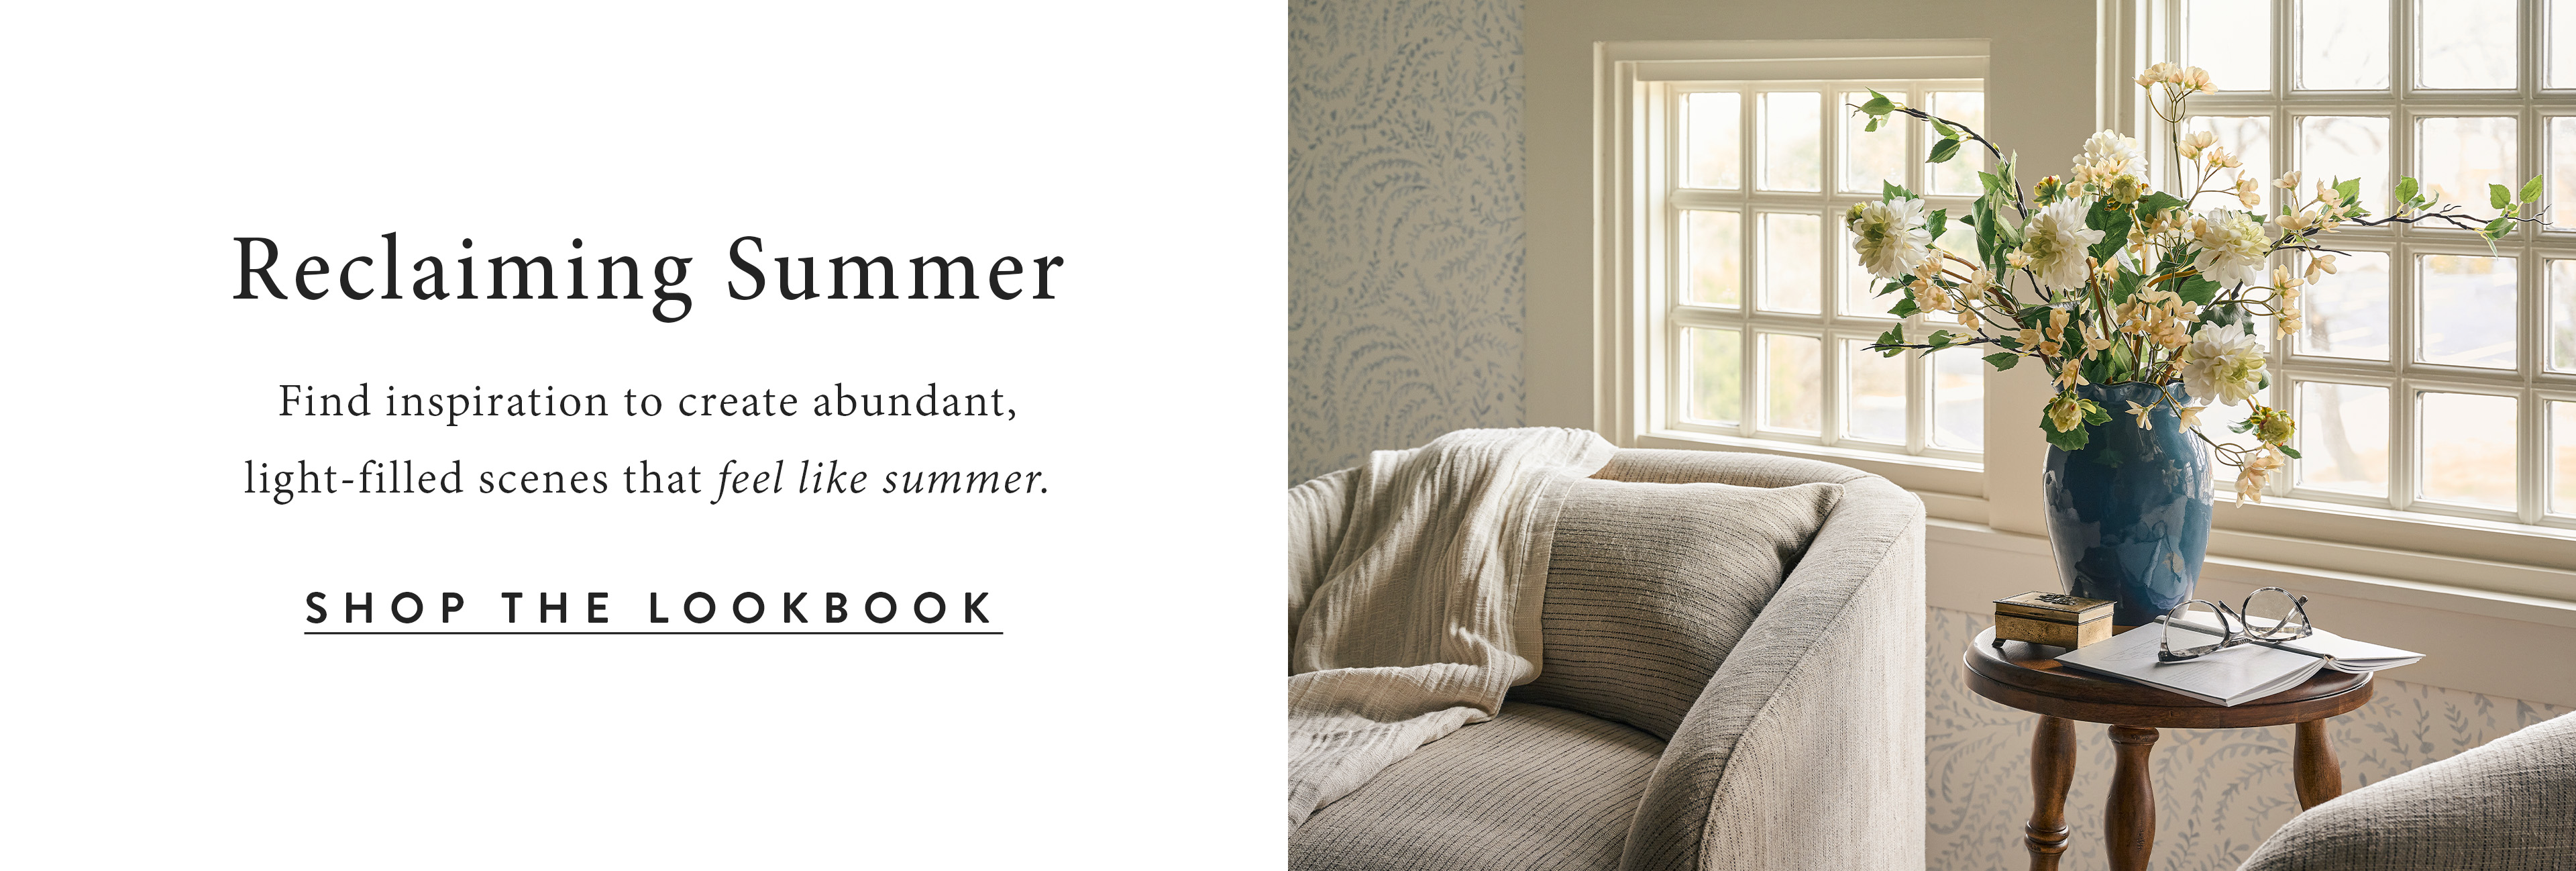 Reclaiming Summer.  Find inspiration to create abundant, light-filled scenes that feel like summer.  shop the lookbook.